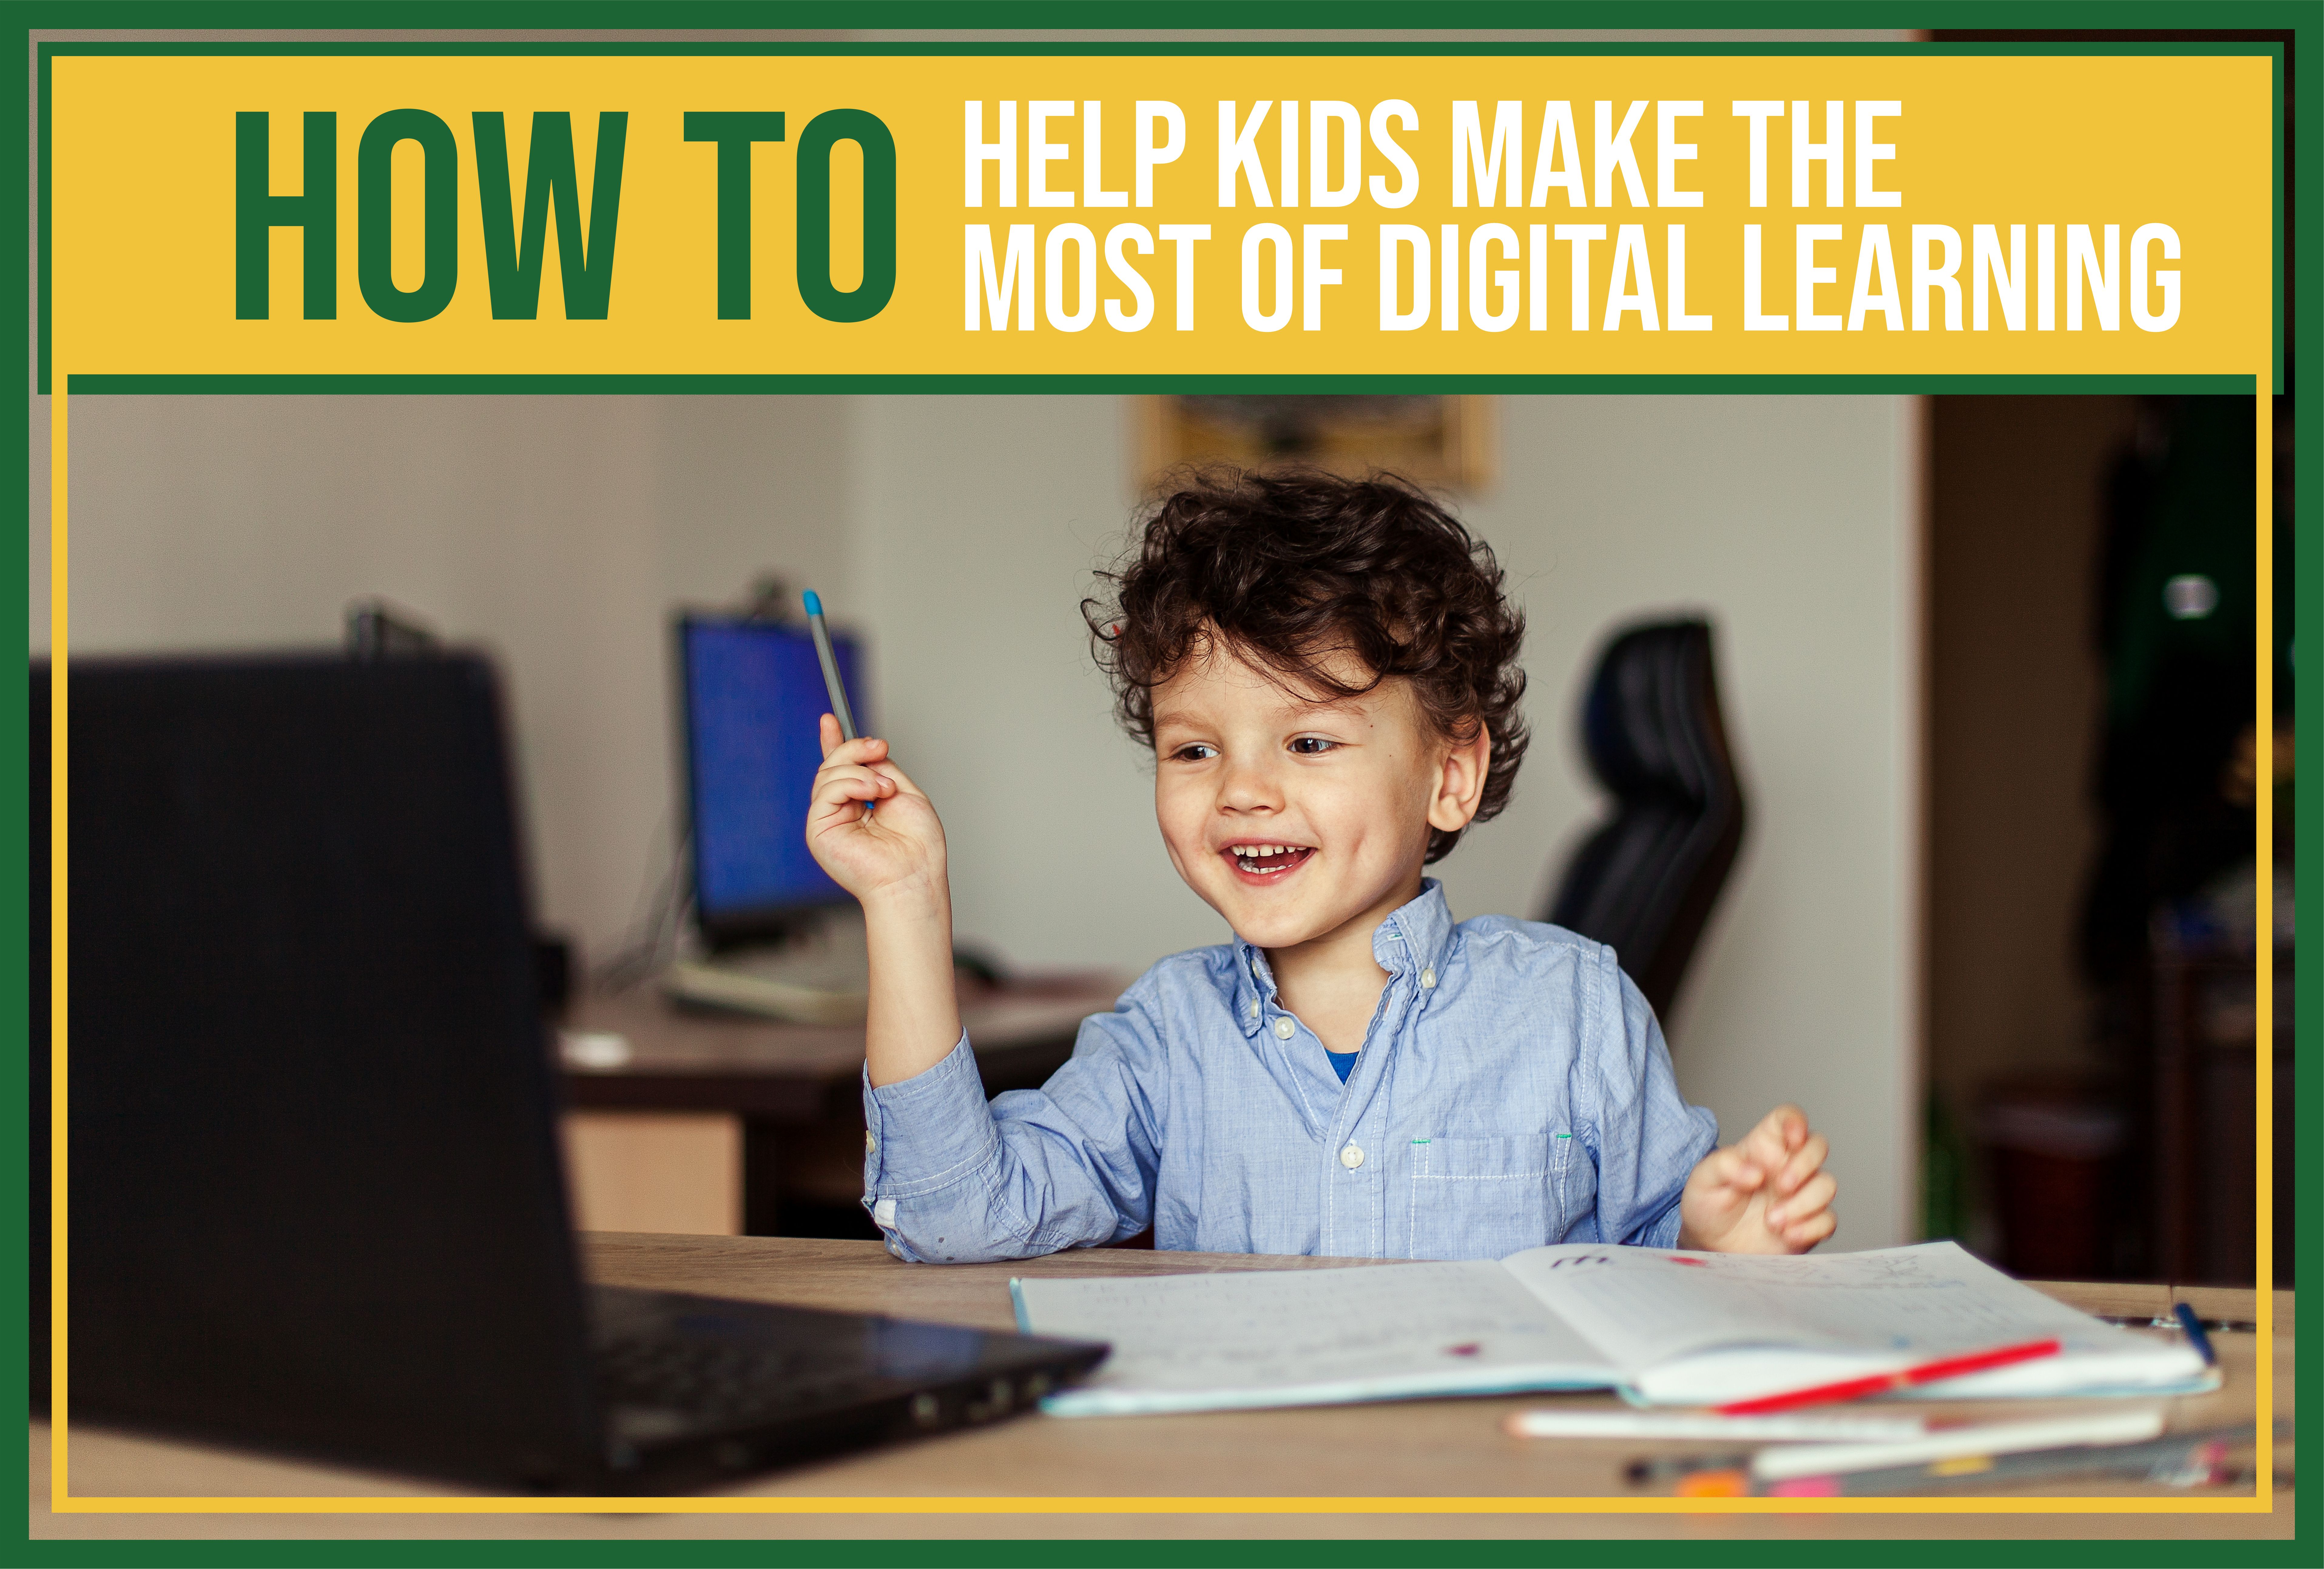 Make the Most of Digital Learning